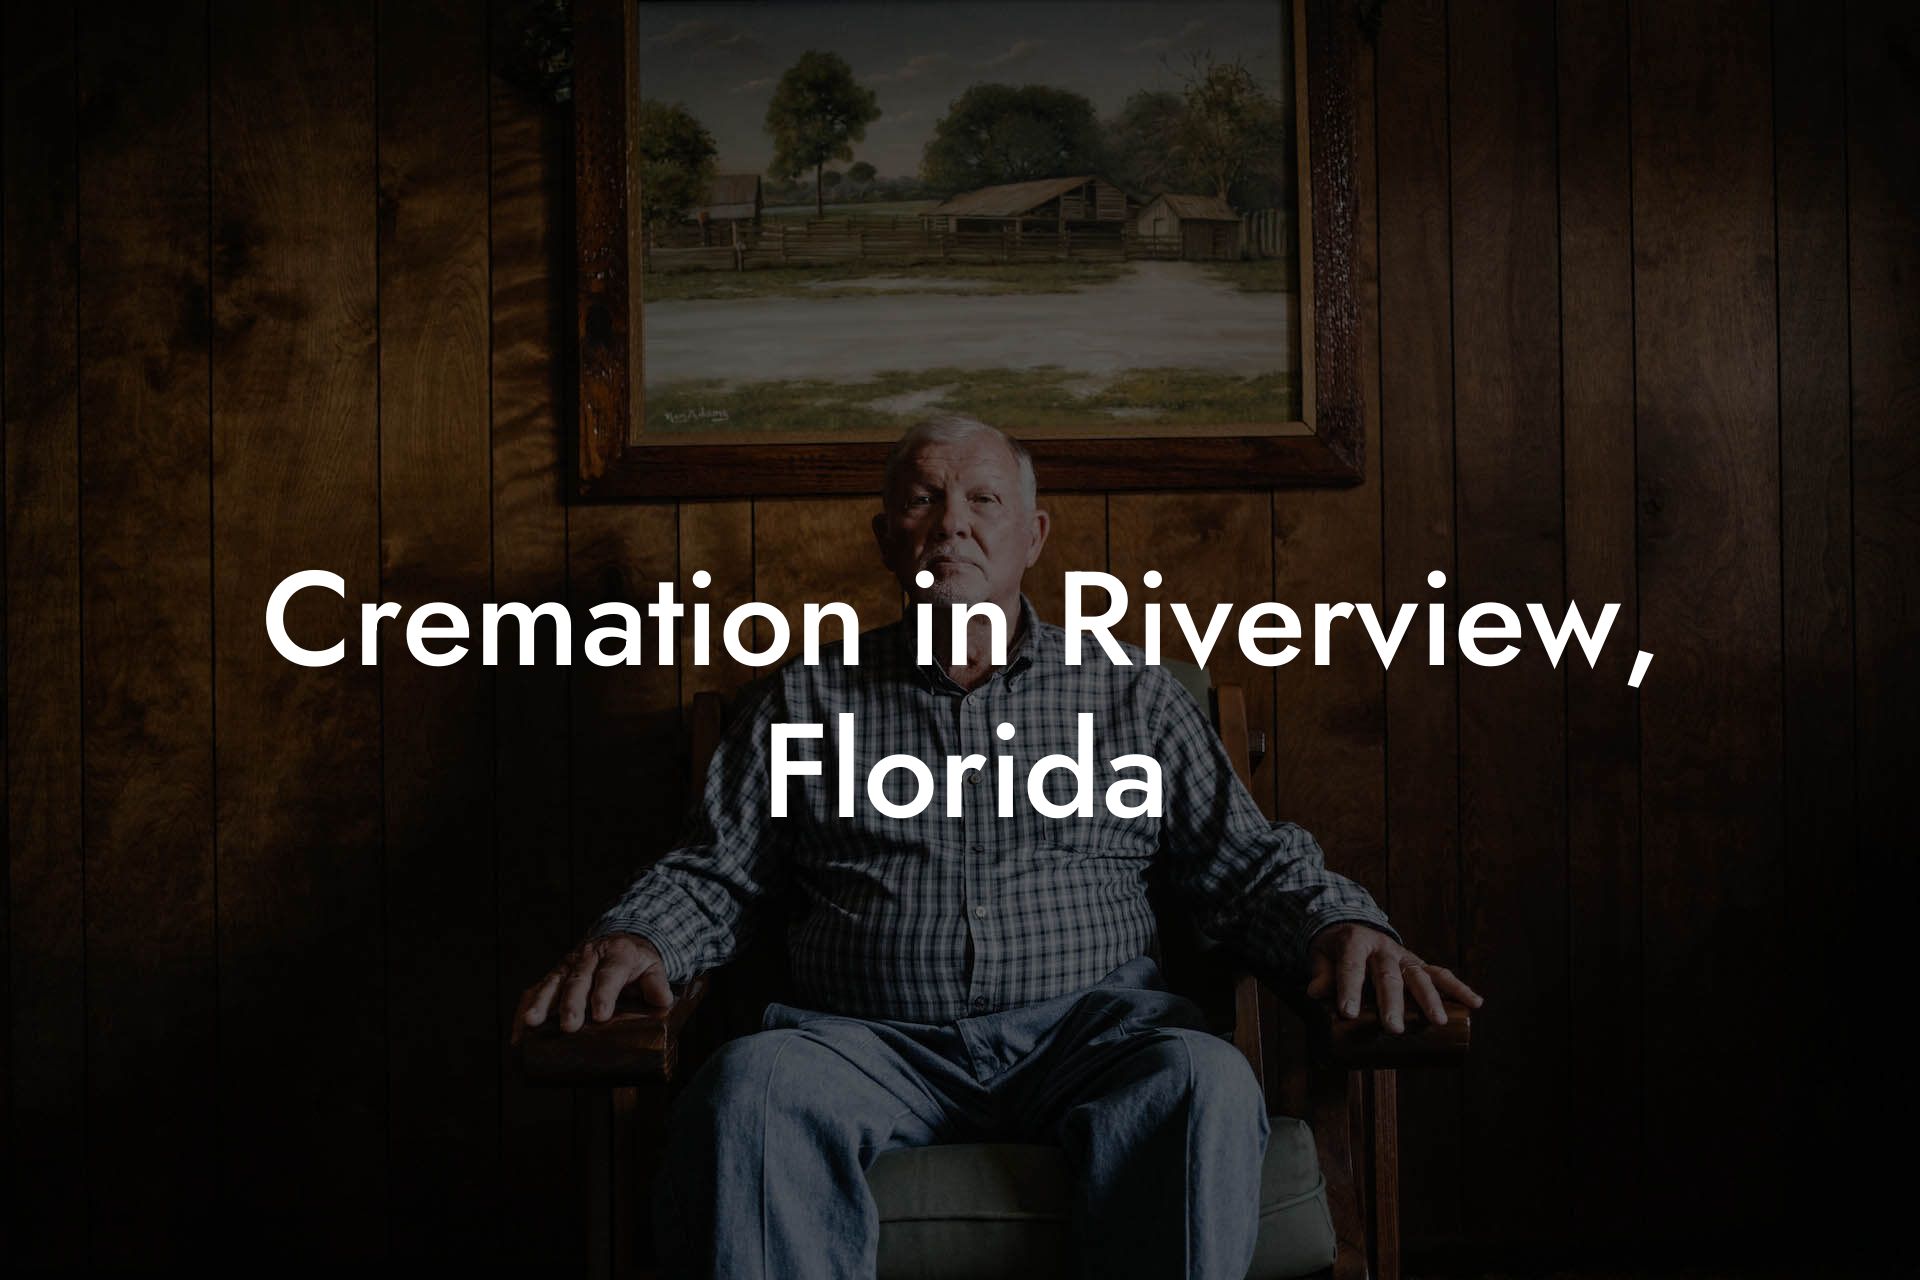 Cremation in Riverview, Florida